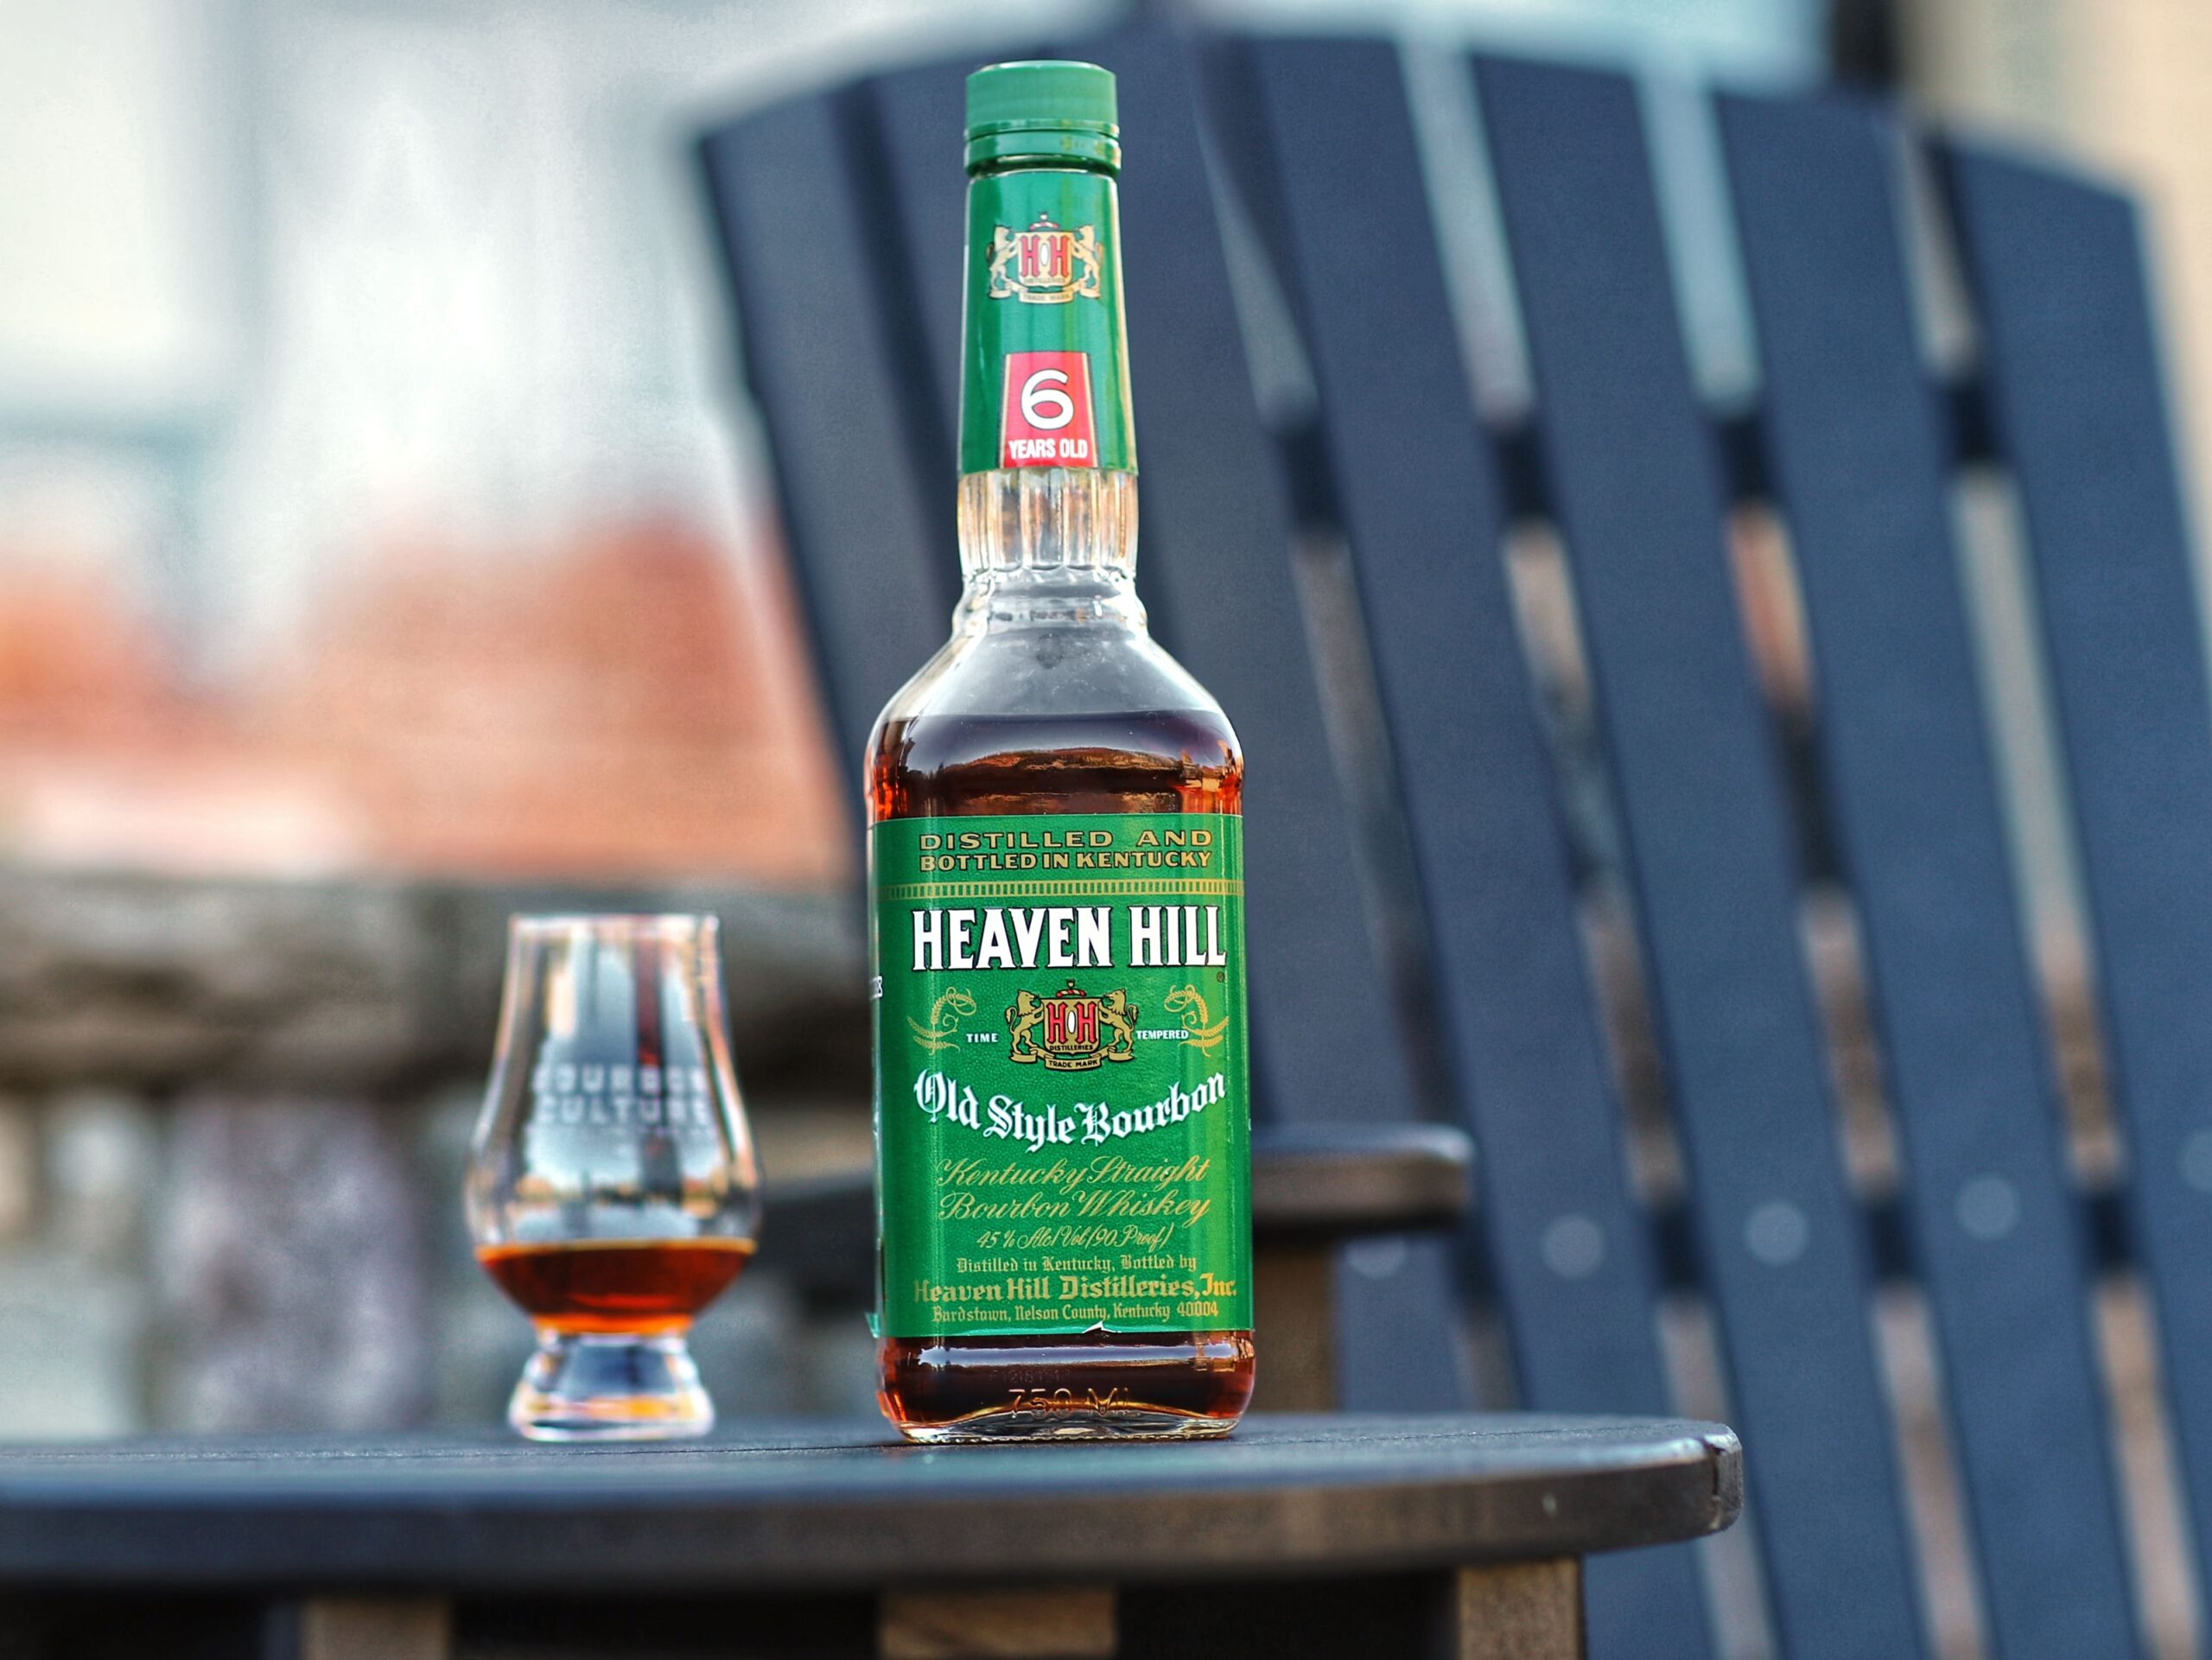 Heaven Hill 6 Year Old Green Label Bourbon Review